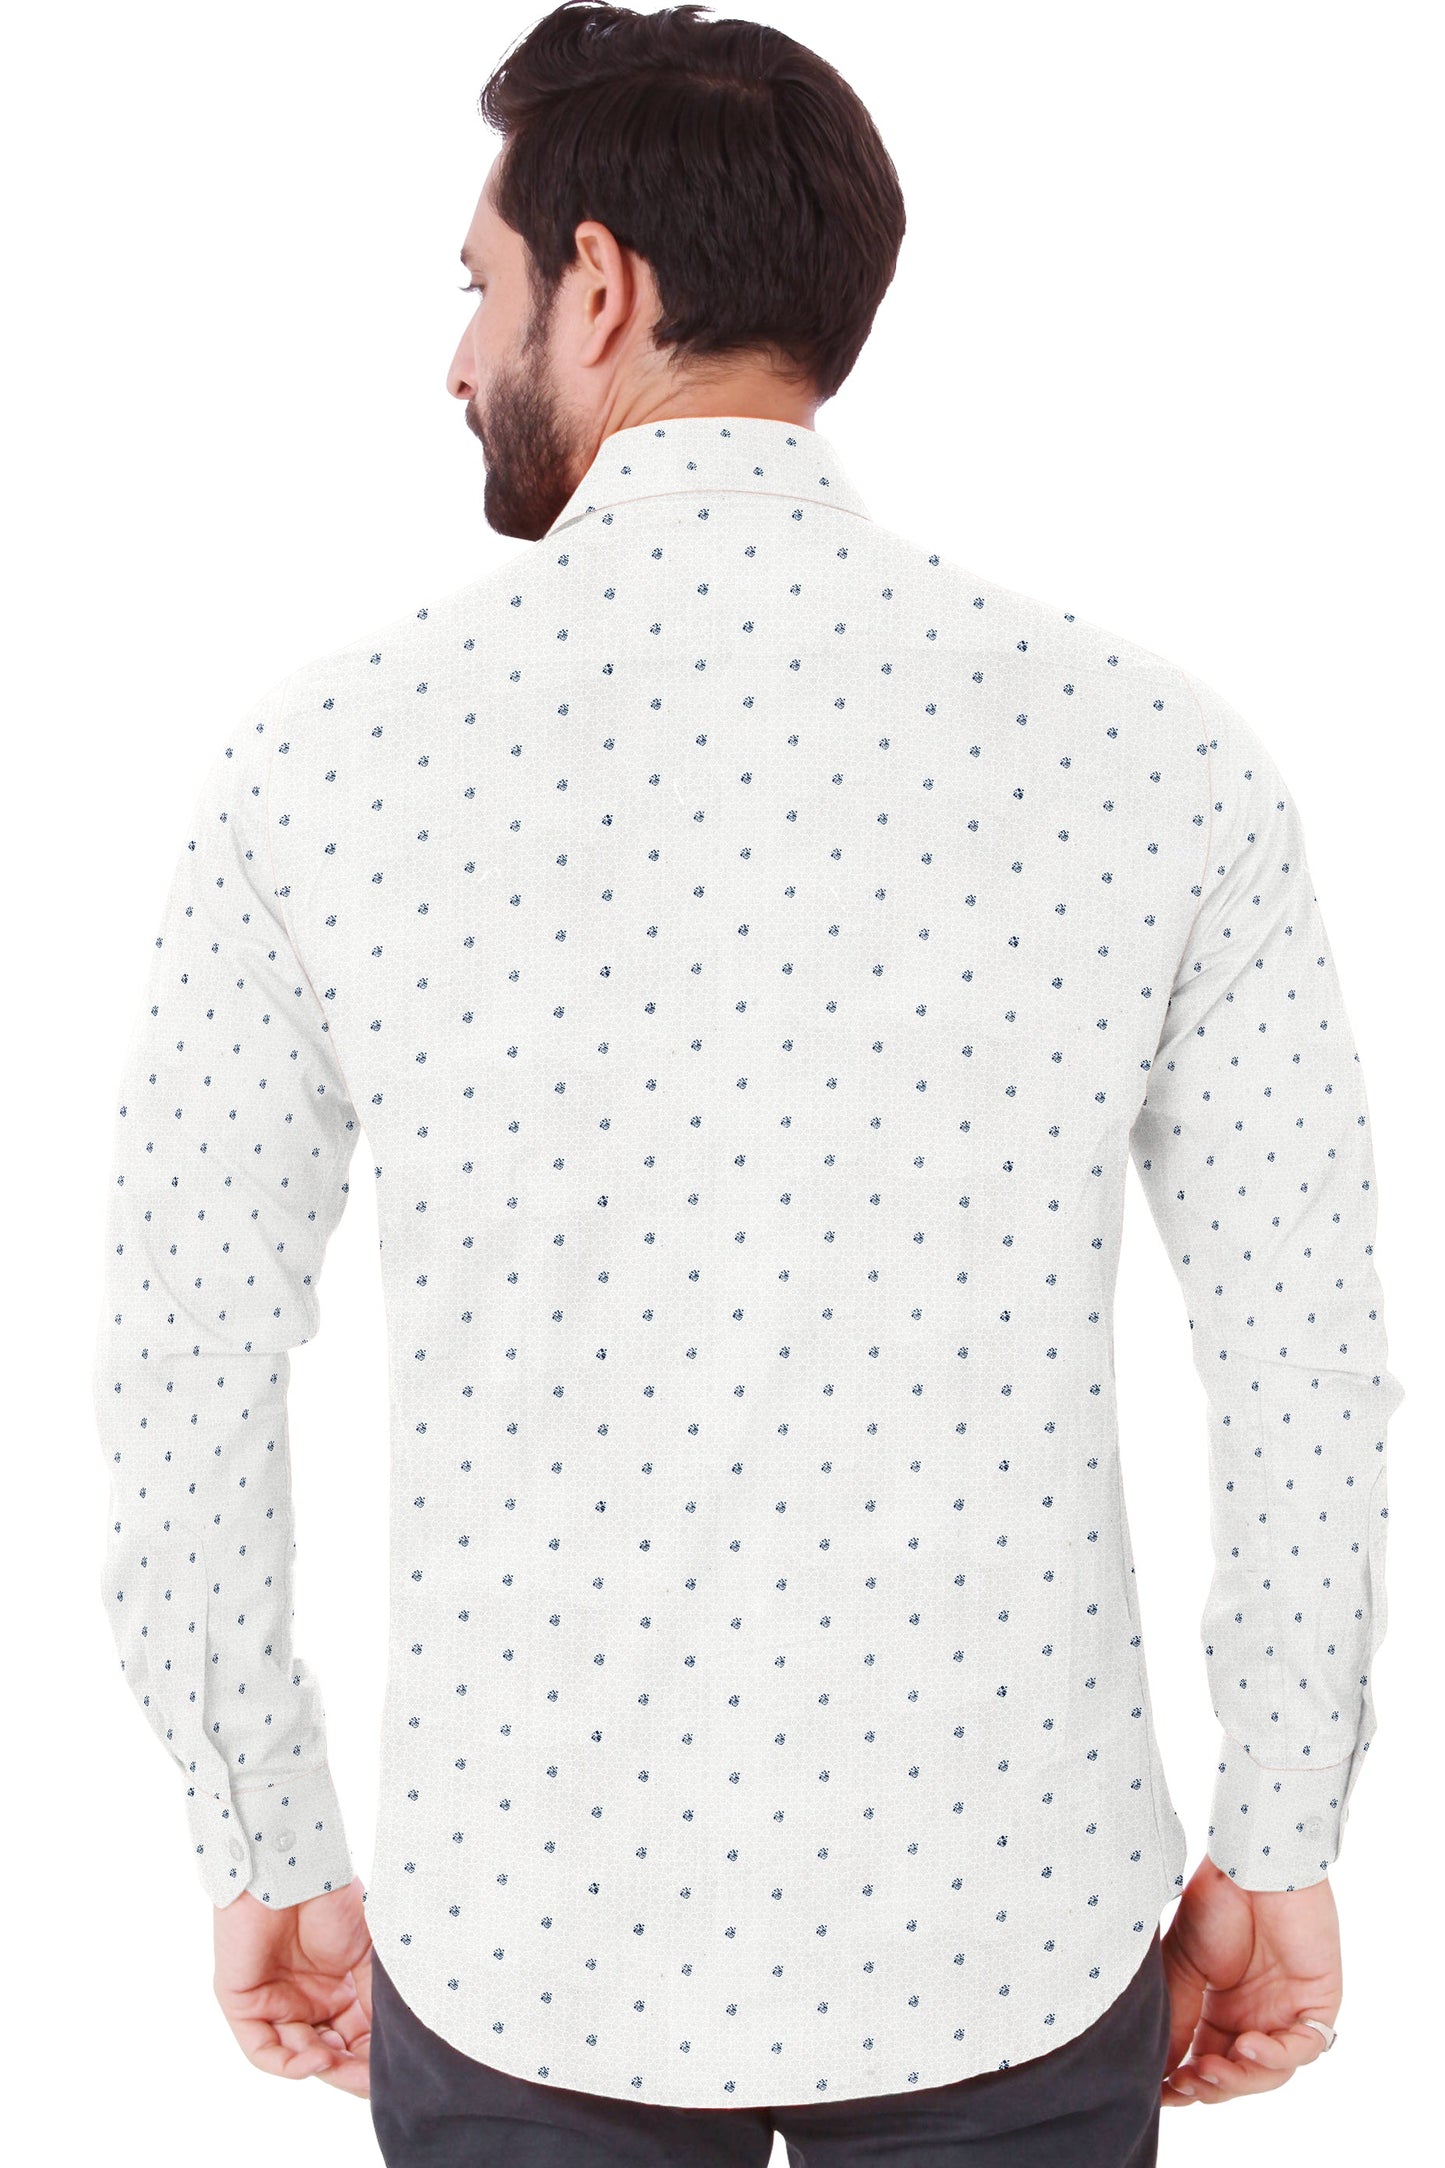 Men's White Printed Design Casual Full Sleeves 100% Cotton - Styleflea